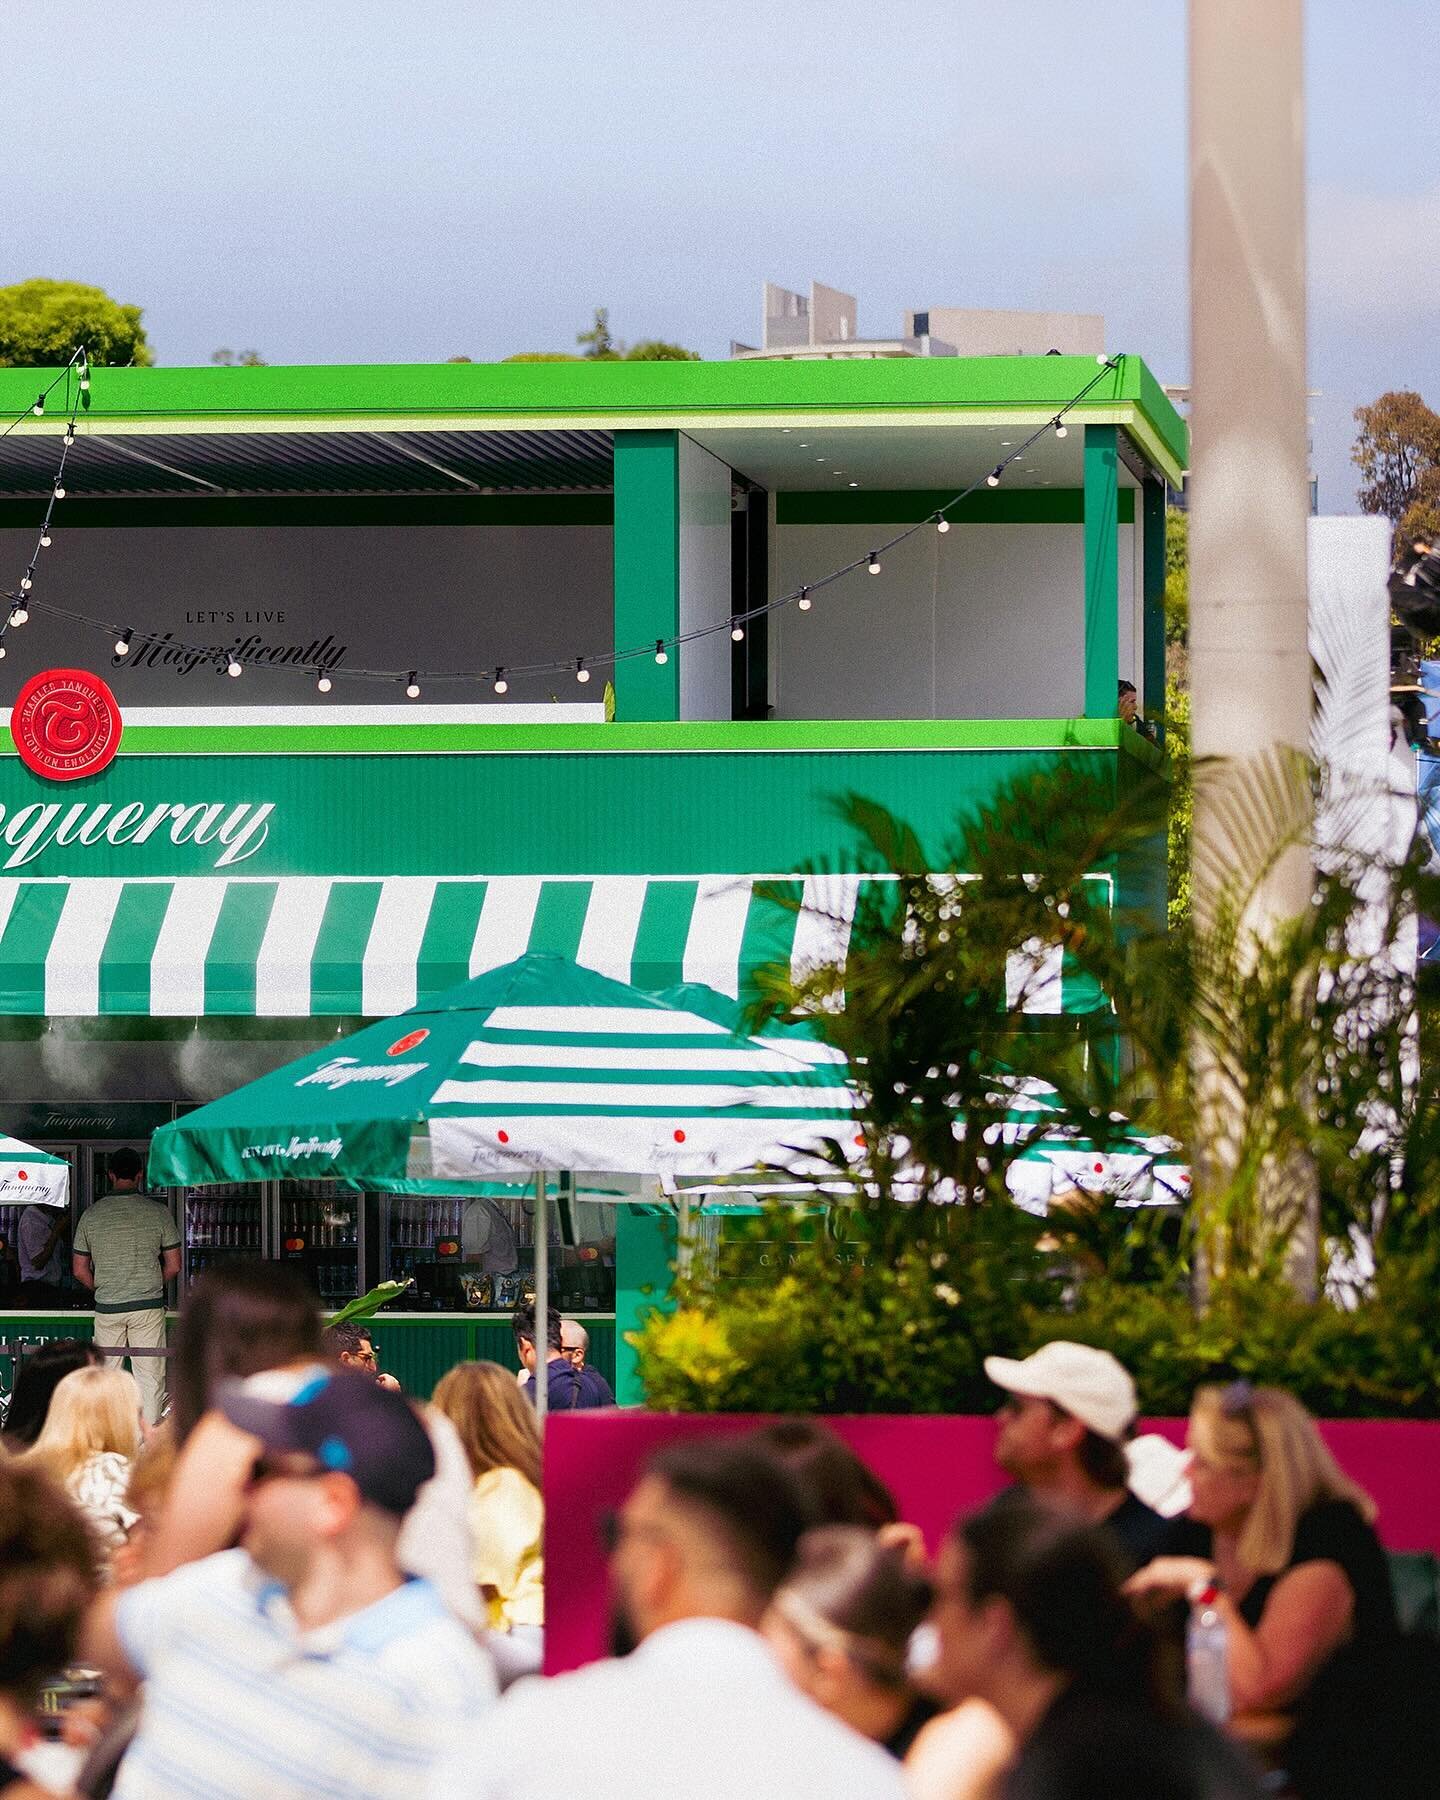 TANQUERAY AT THE AO | @hellotraffik is serving up Magnificence at the @australianopen with @tanquerayginau for @diageo - WHAT A SHOW STOPPER! #letslivemagnificently